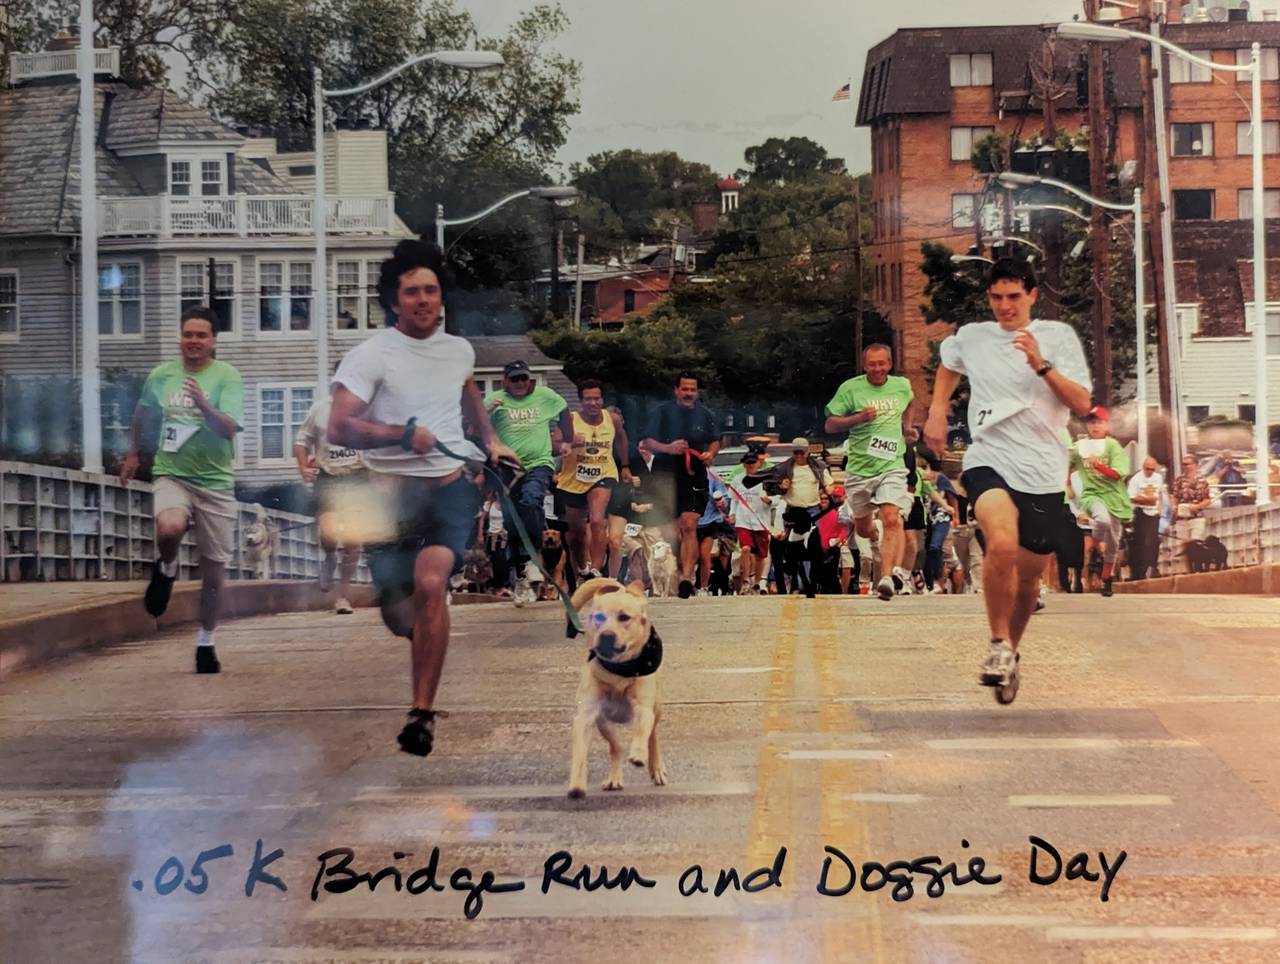 A photo on the wall at Boatyard Bar & Grill shows one of the first .05 K run across the Spa Creek Bridge, known to residents on one side as the Eastport Bridge. The race began after the bridge reopened following a shut down for maintenance in 1998.